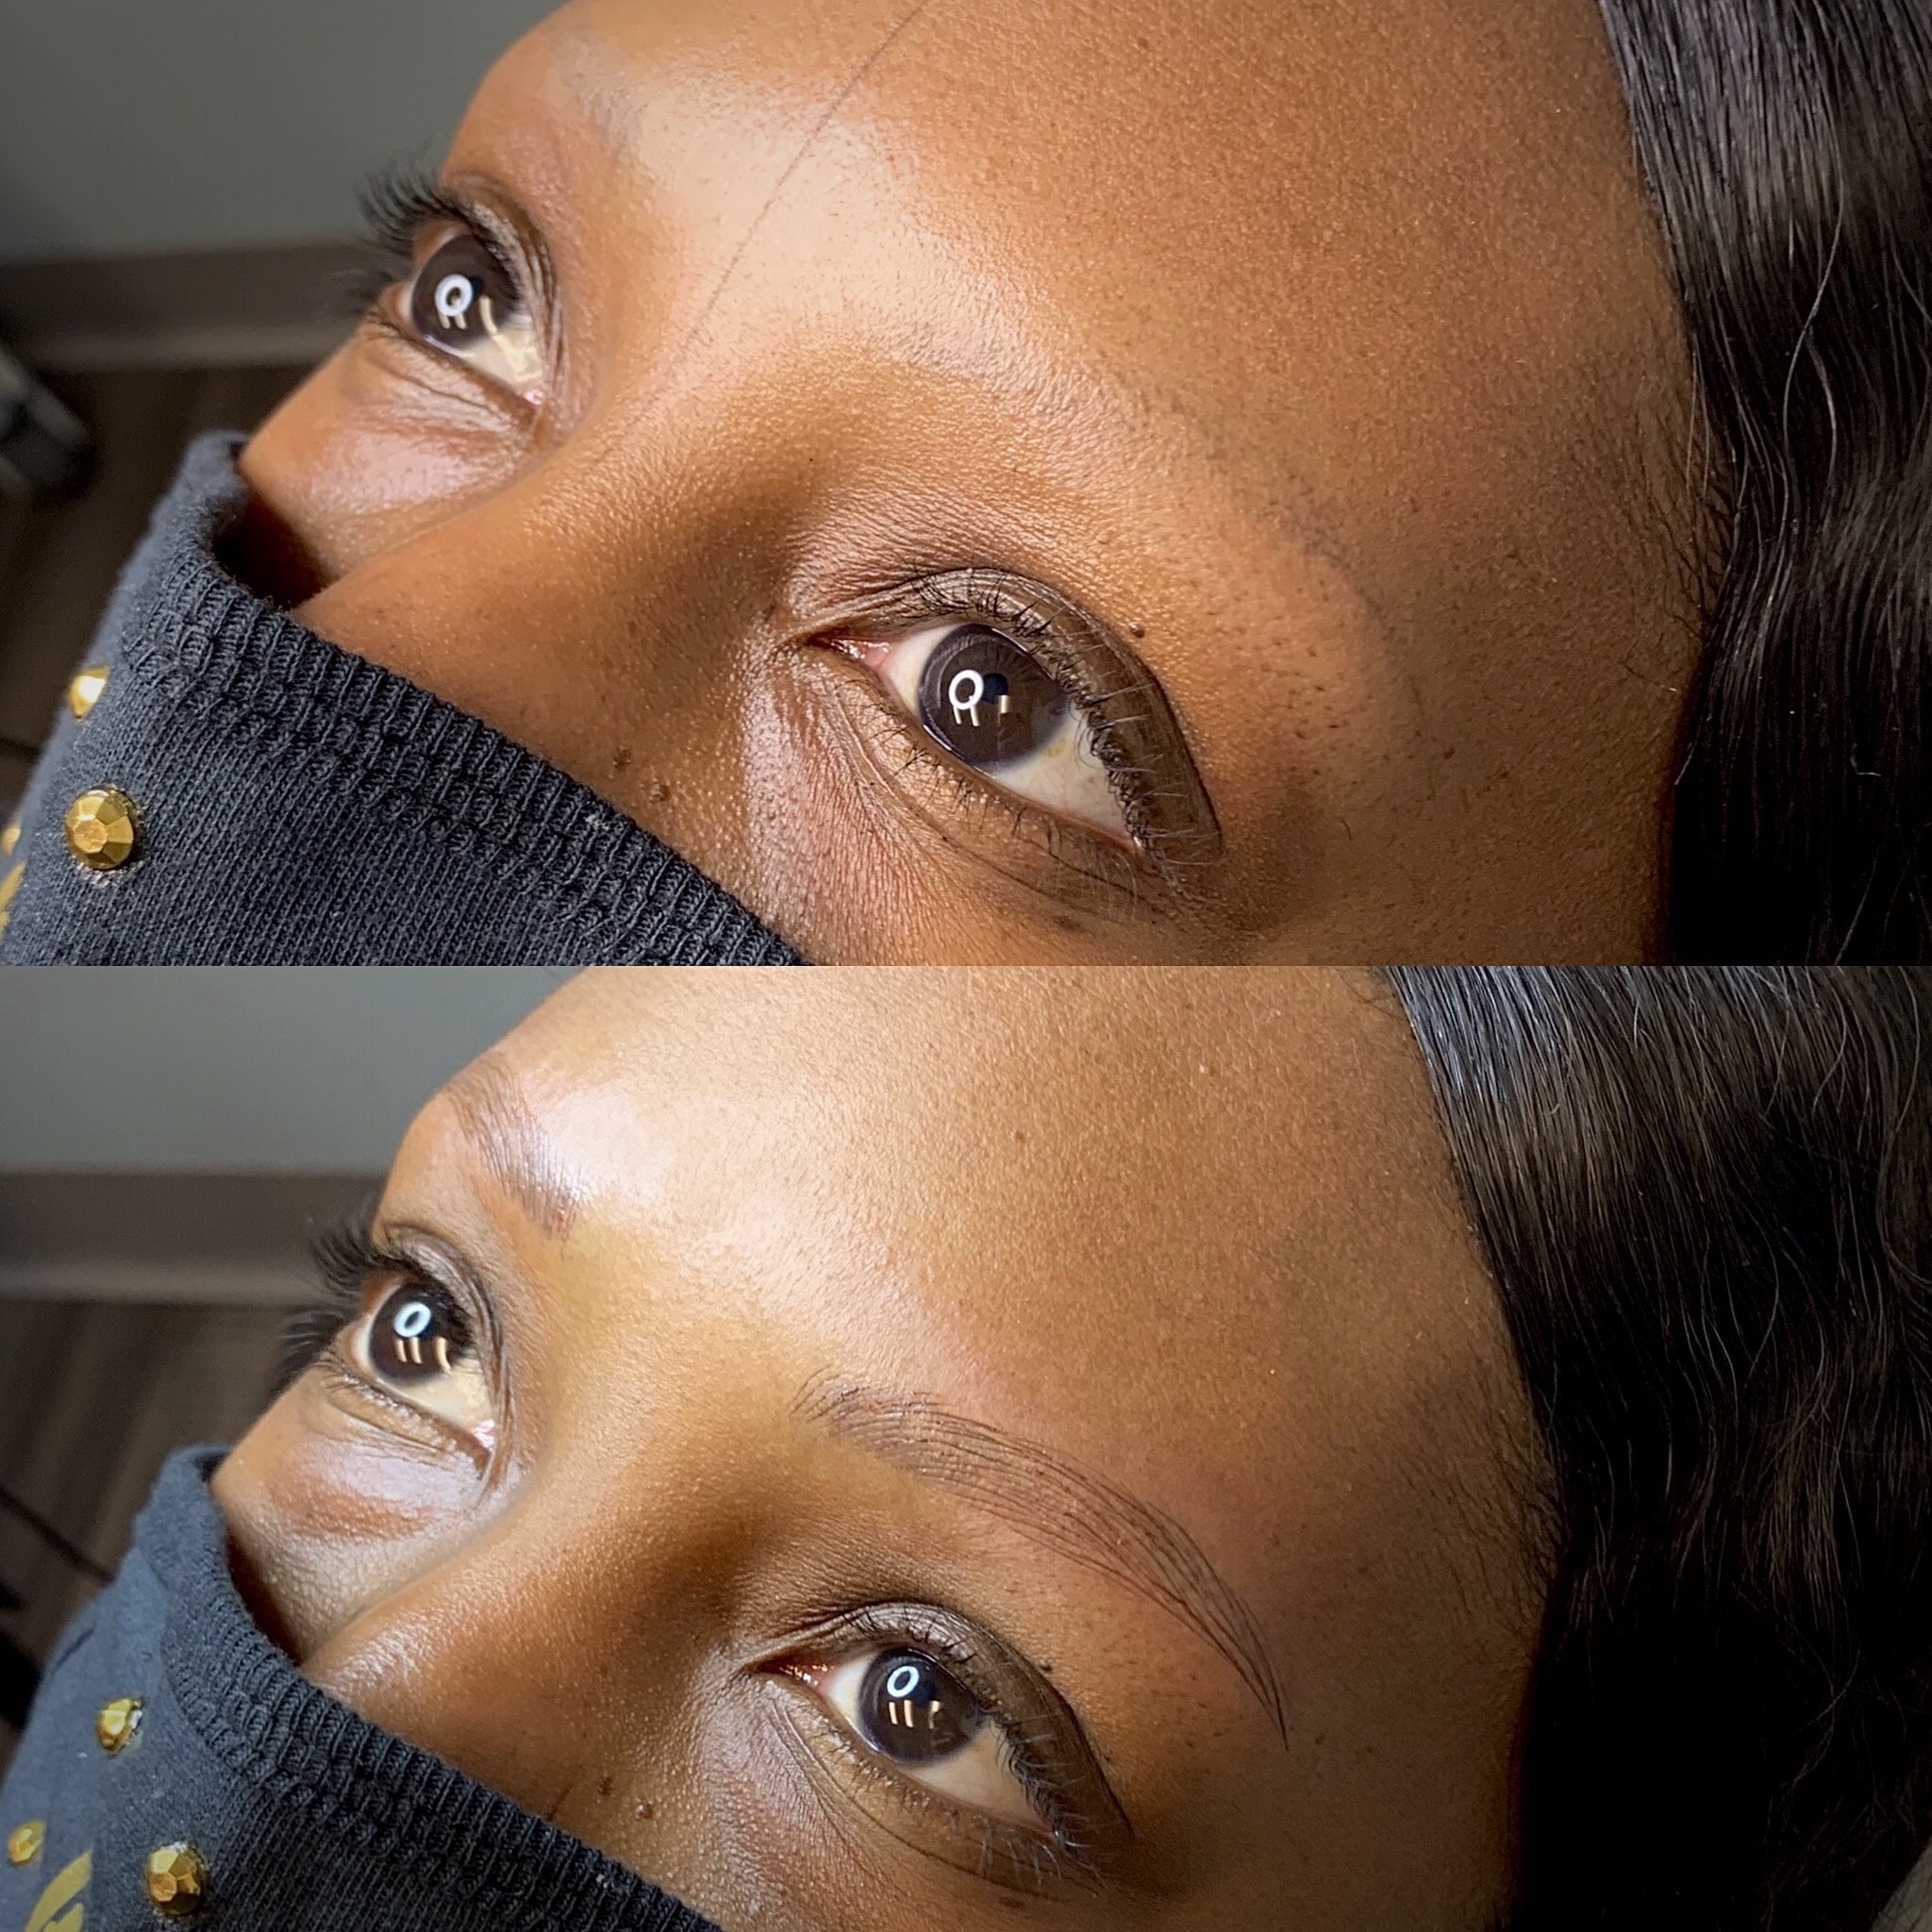 female patient’s eyebrows before and after microblading treatment